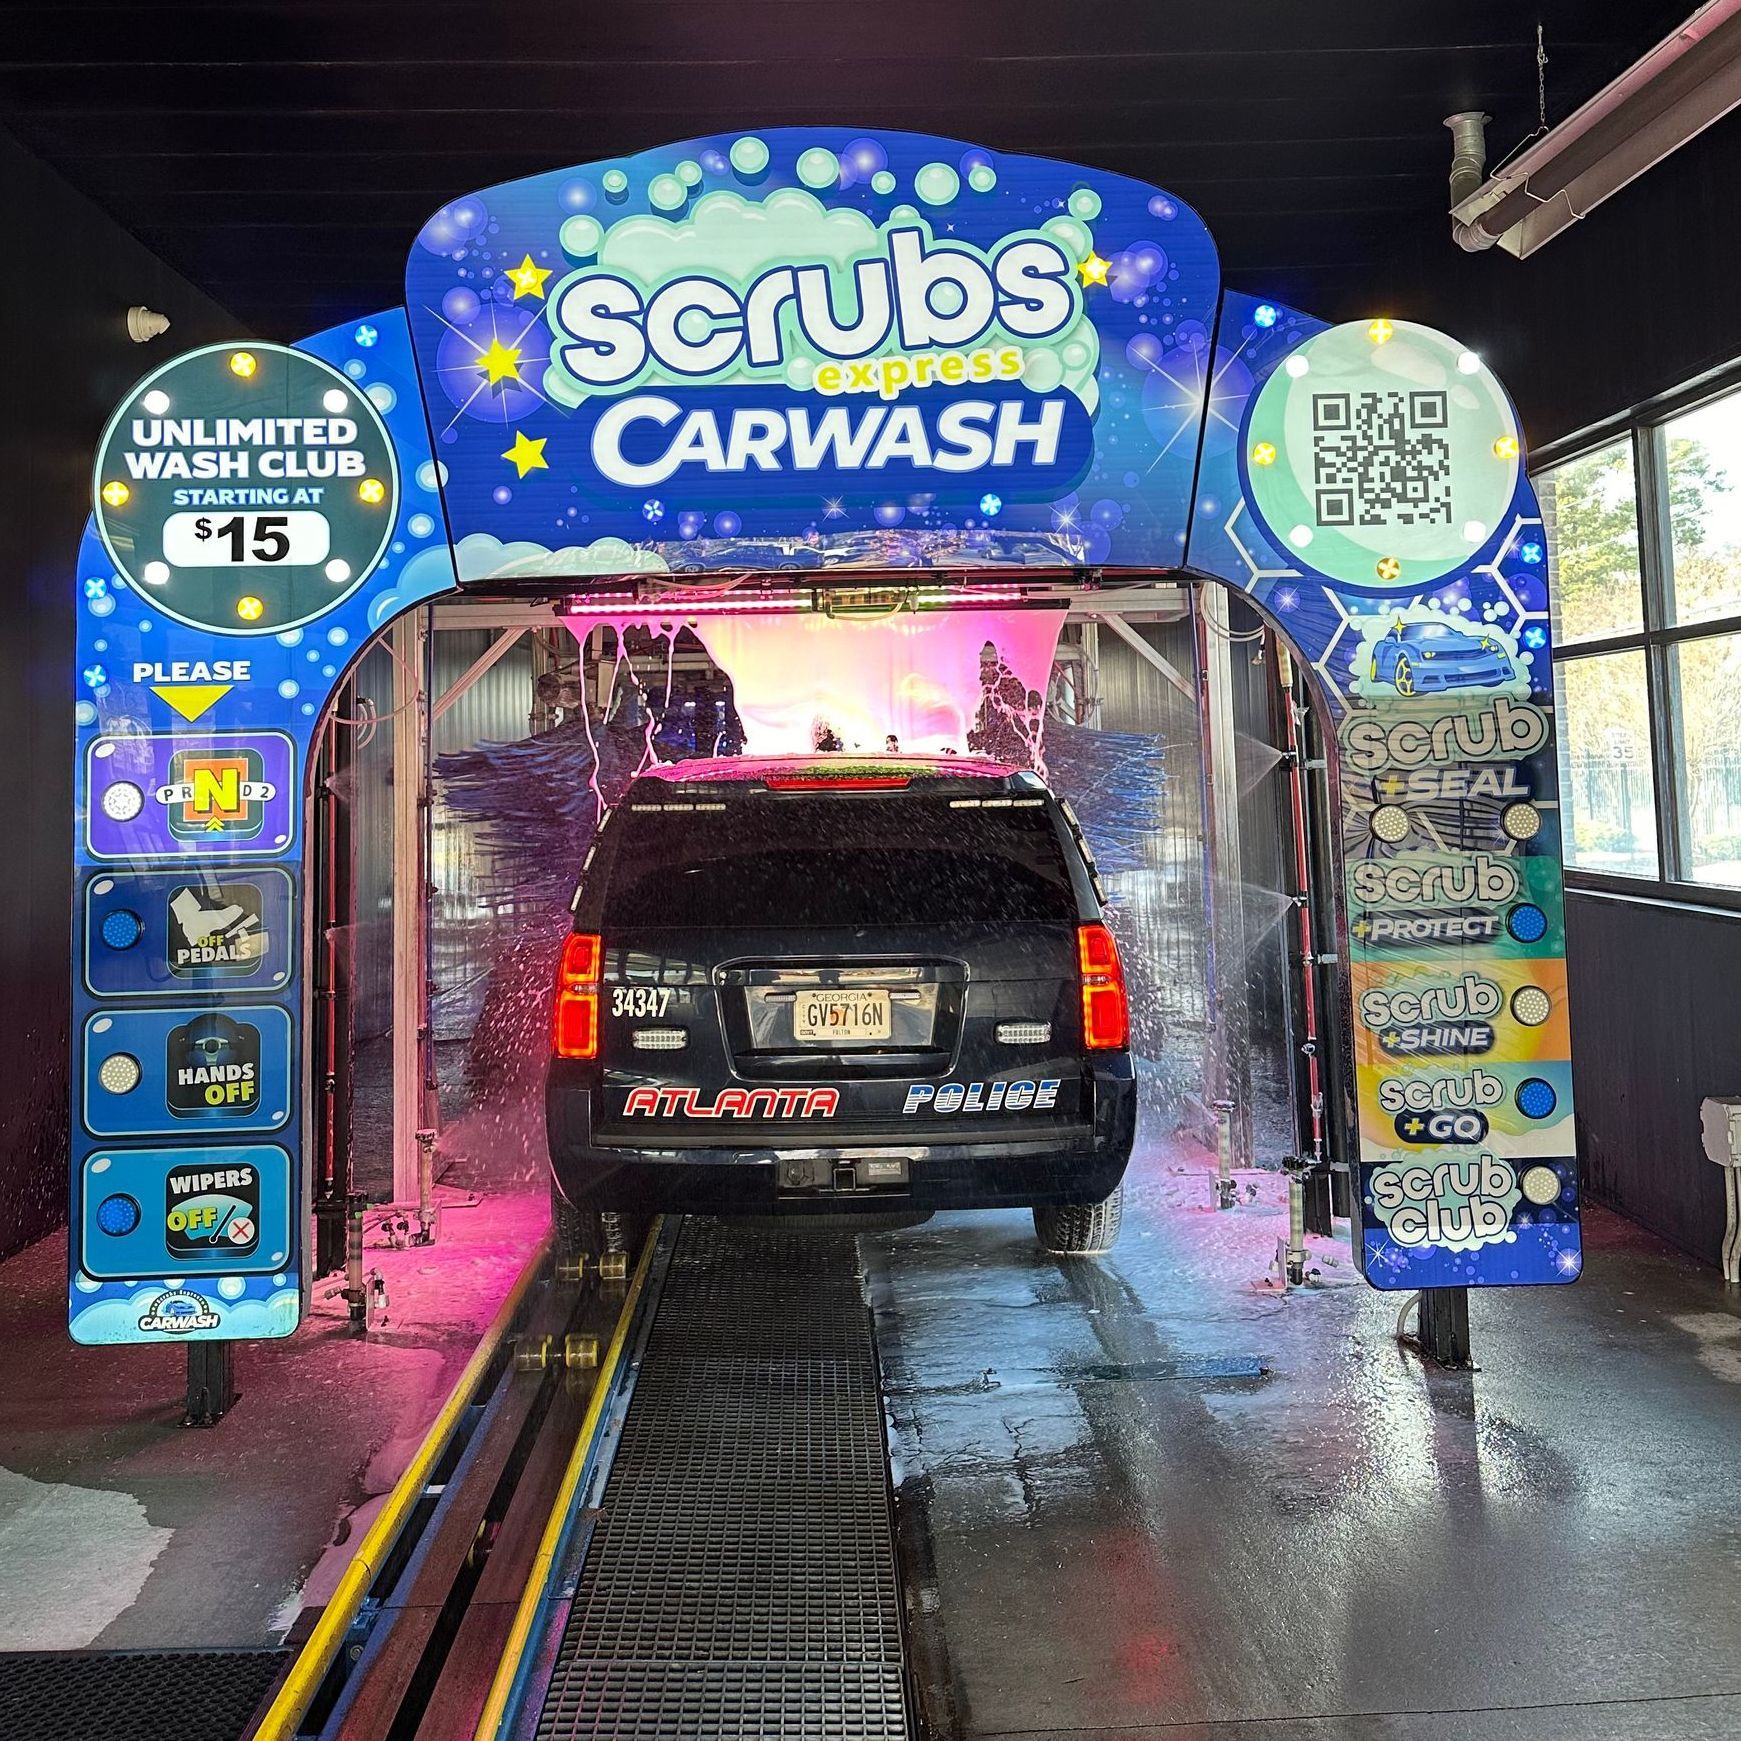 CARWASH GRAND ENTRY ARCH GRAPHIC DESIGN. Custom graphic design services to welcome your customers into your carwash in style.